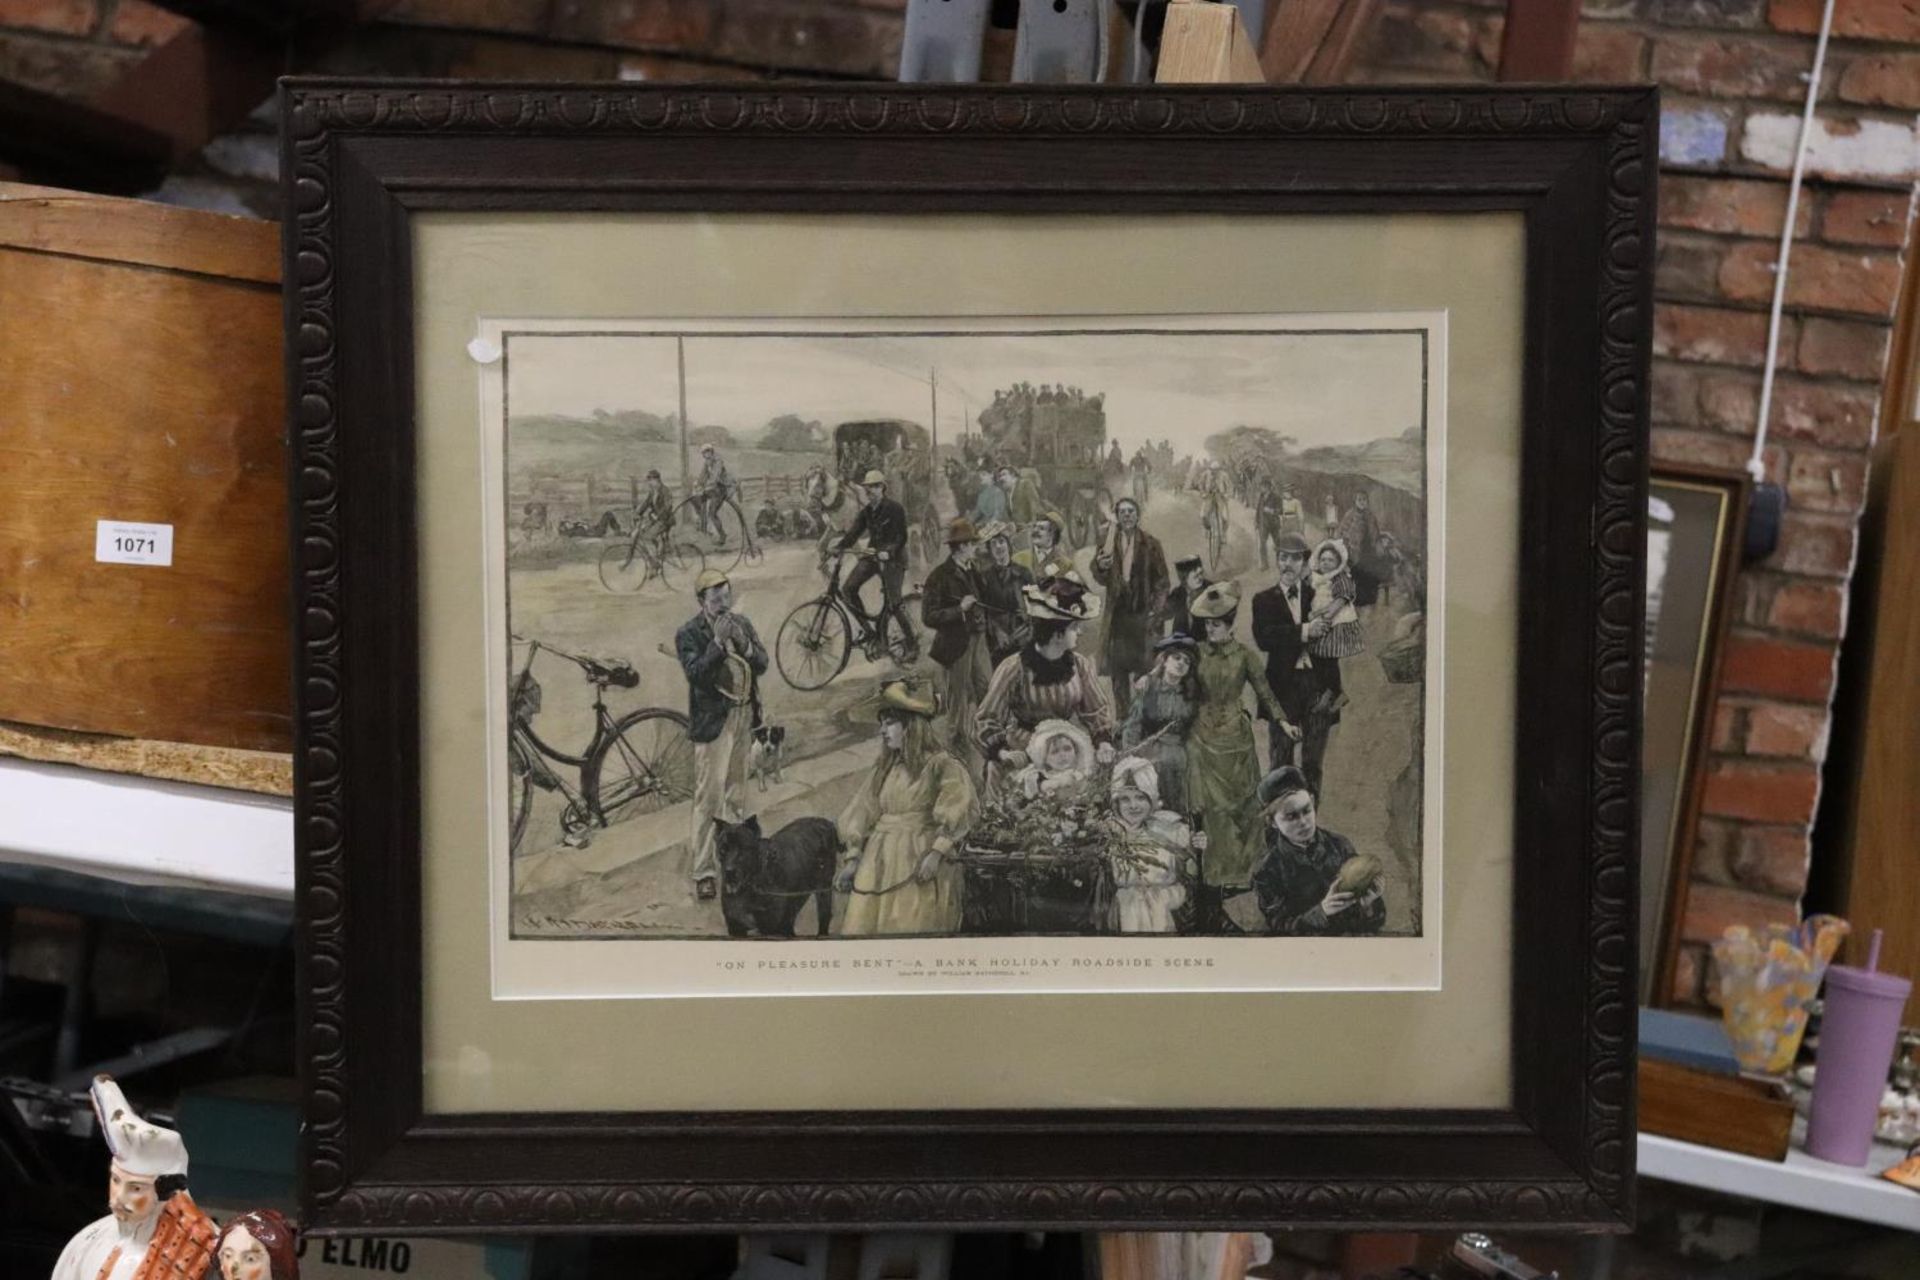 A FRAMED PRINT OF THE ENGRAVING BY WILLIAM HATHERELL 'ON PLEASURE BENT - A BANK HOLIDAY ROADSIDE